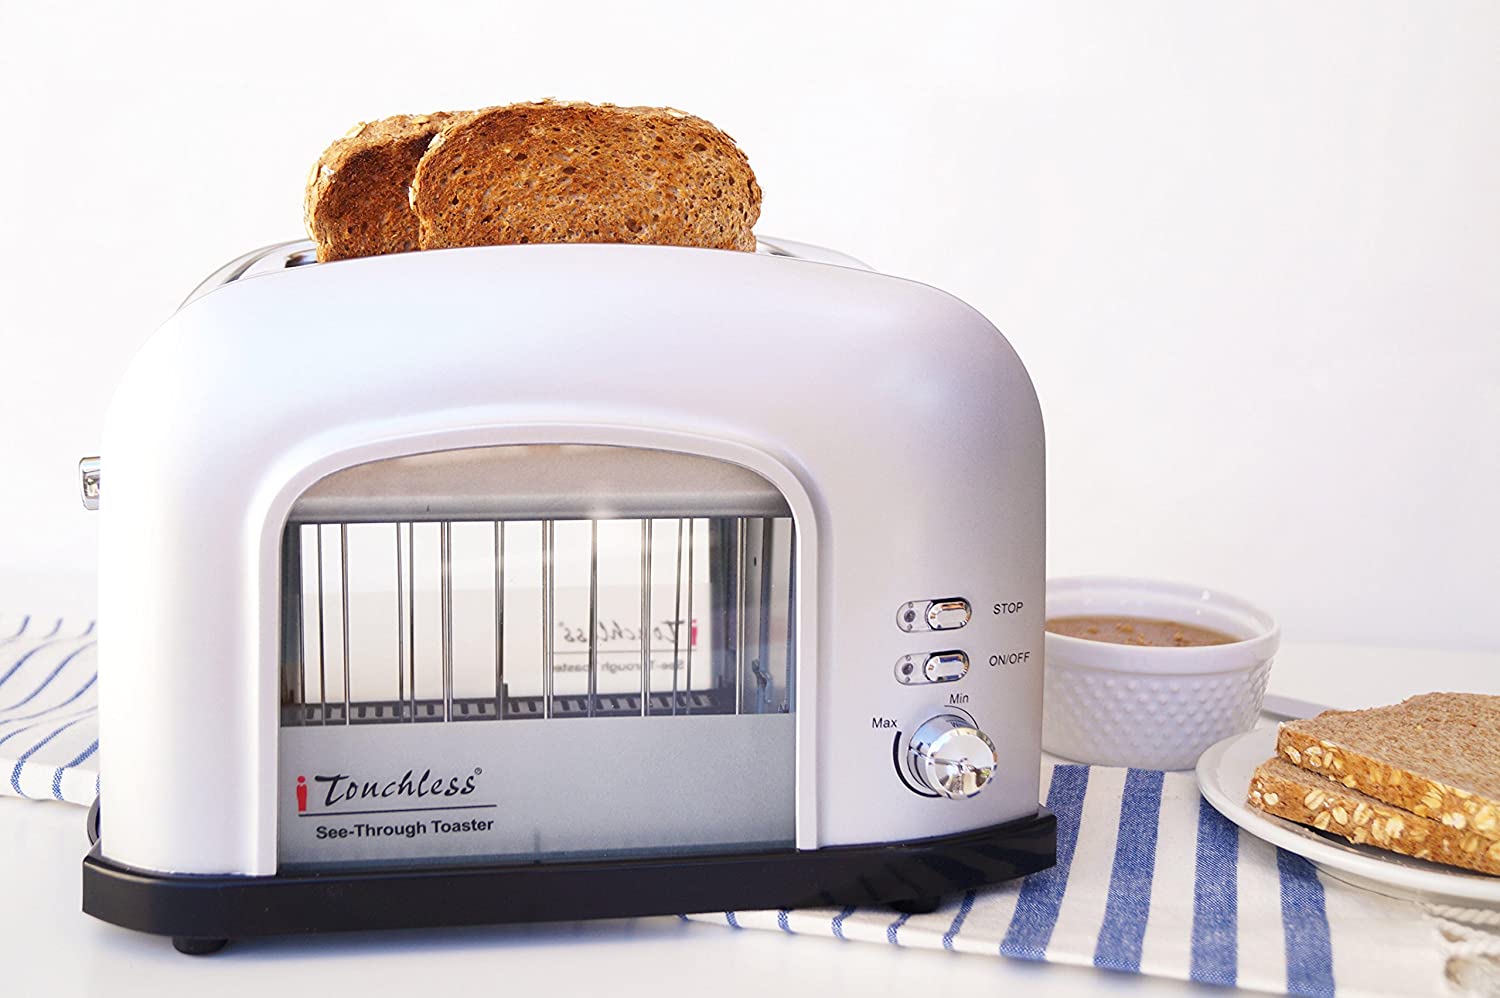 iTouchless SHT2GS 2-slice See-Through Smart Toaster